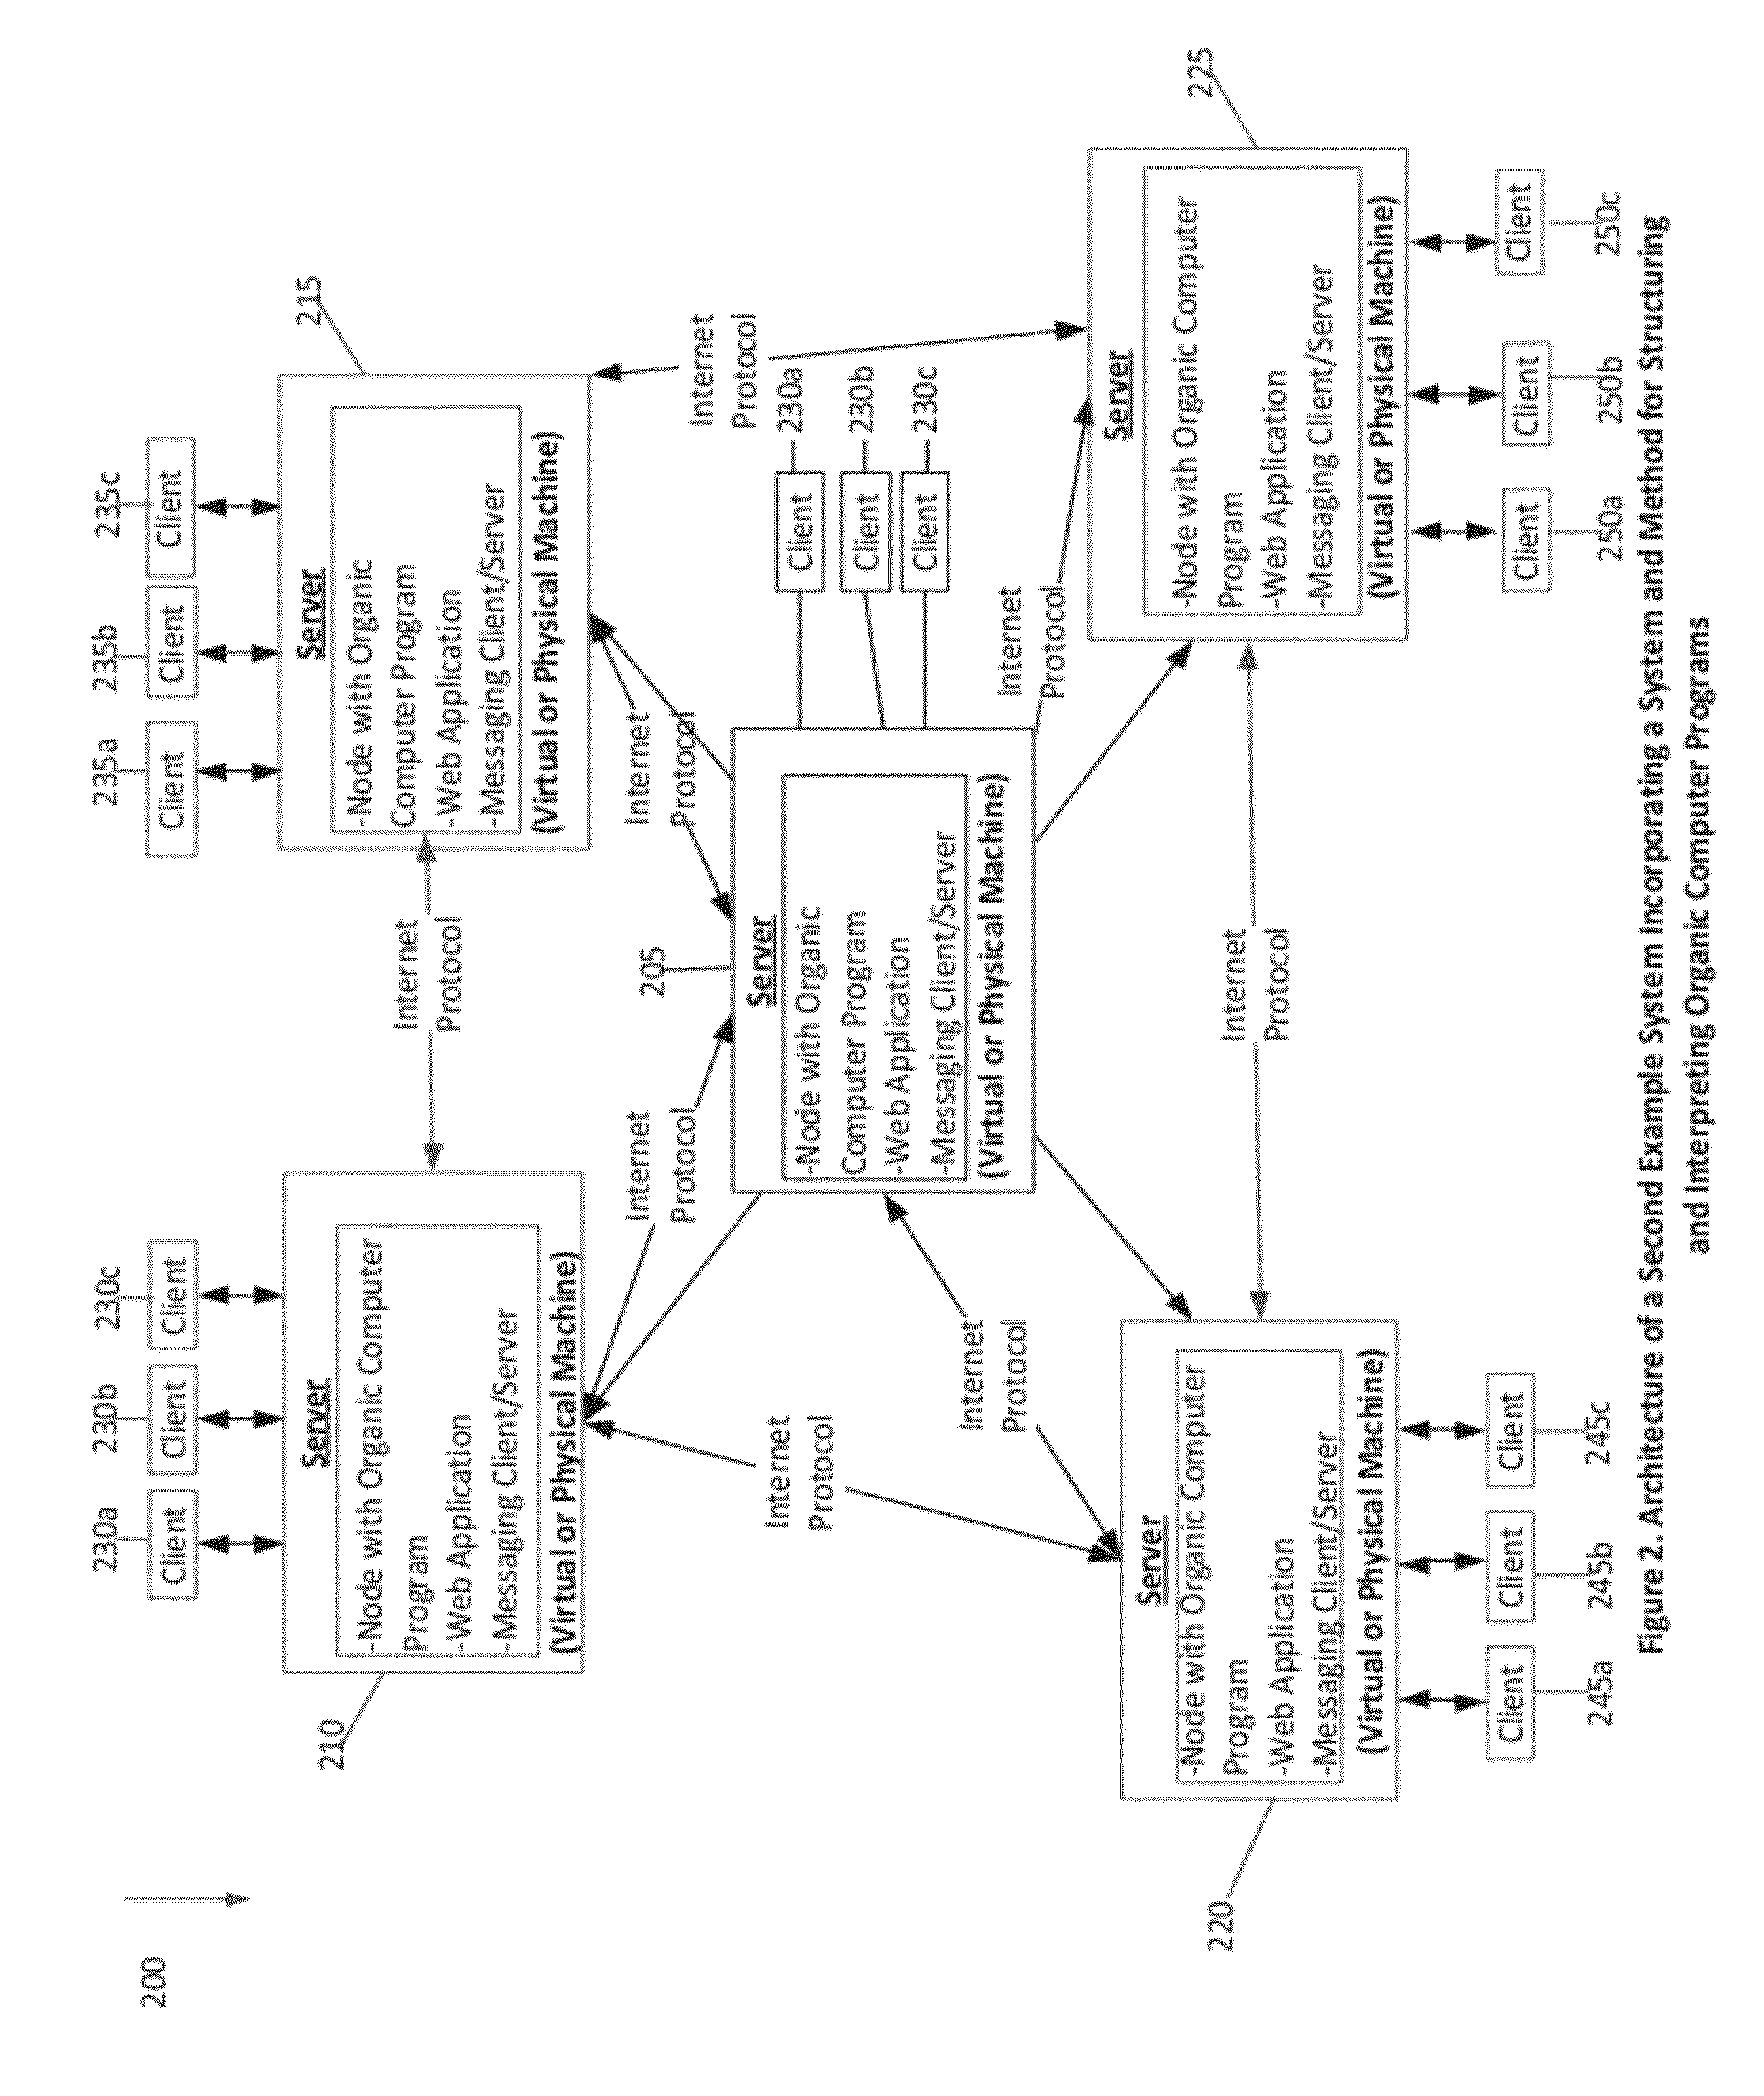 System and method for the structuring and interpretation of organic computer programs